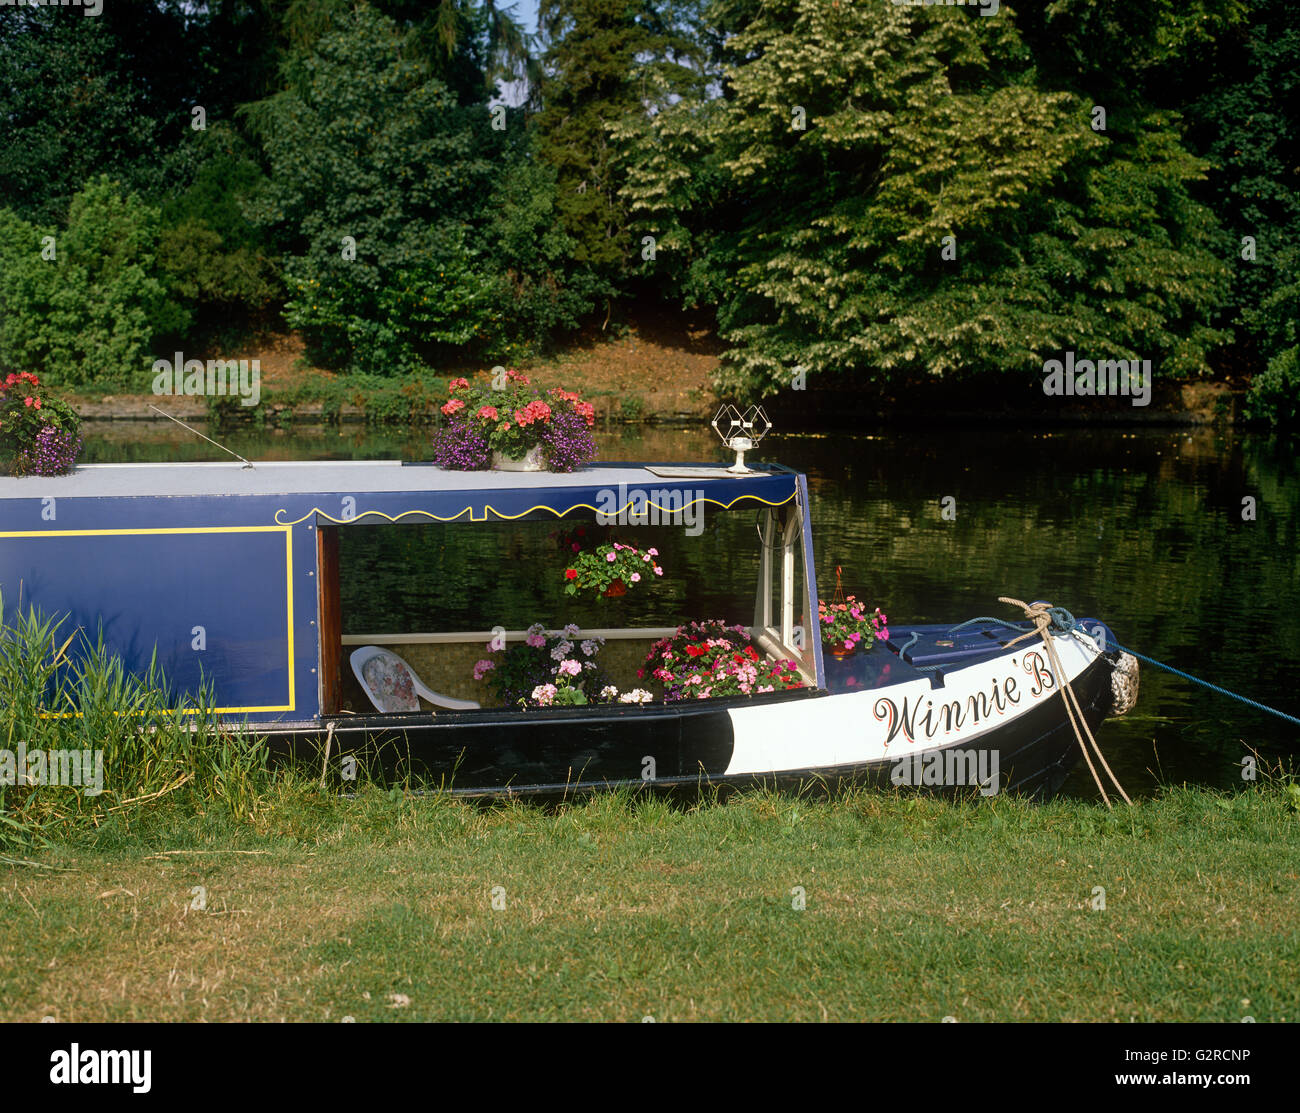 A canal boat, docked to the side of the river Stock Photo